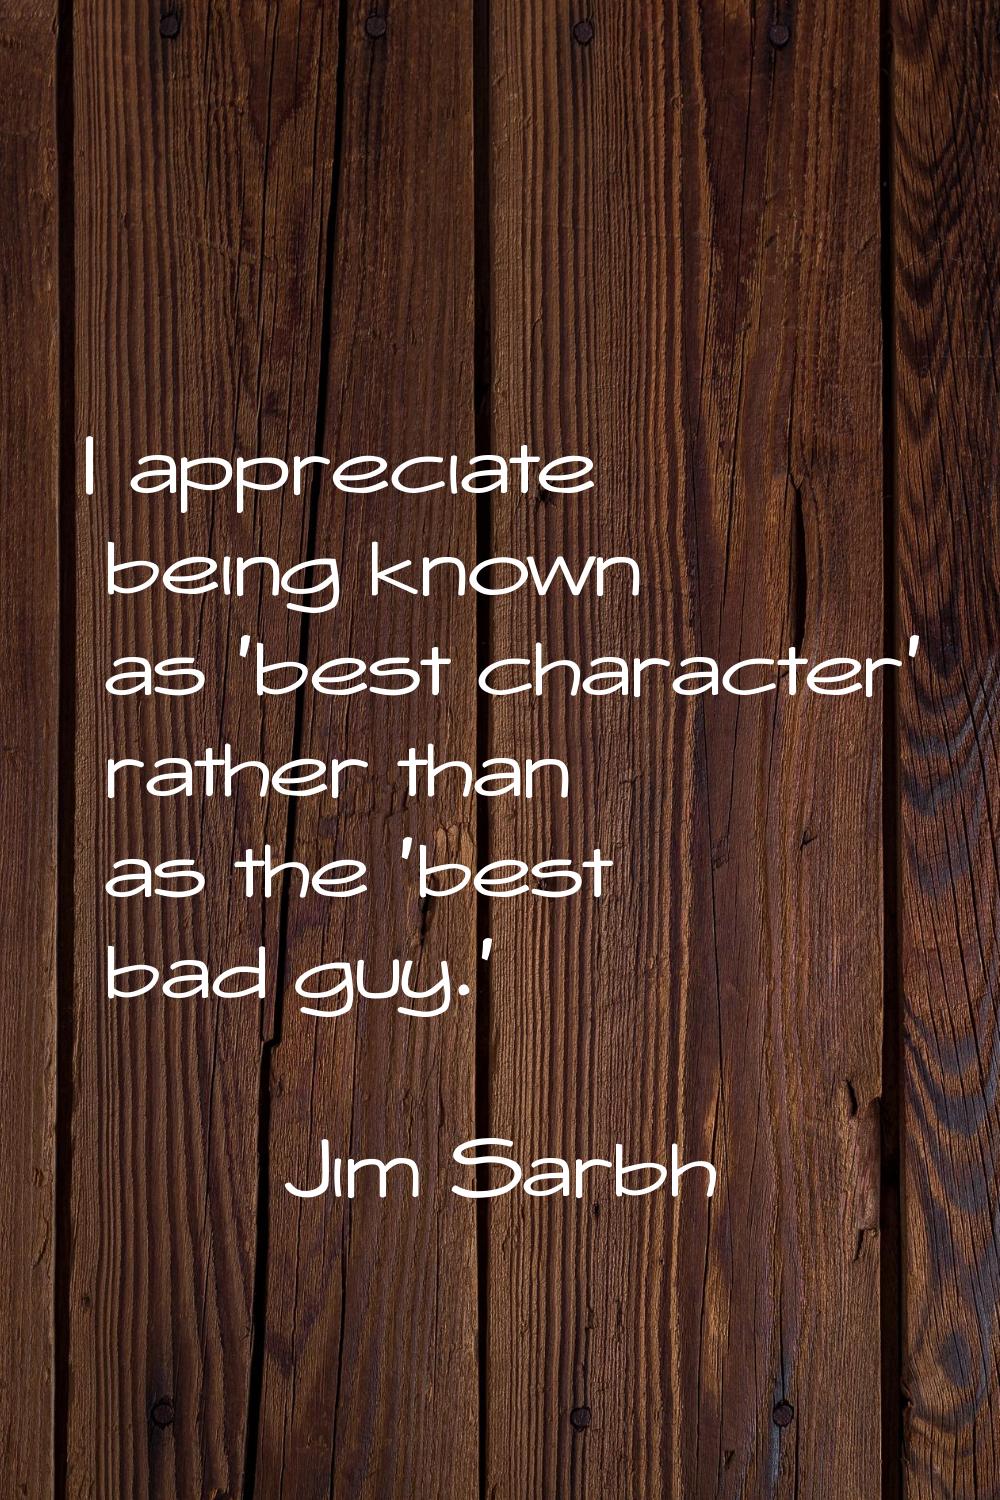 I appreciate being known as 'best character' rather than as the 'best bad guy.'